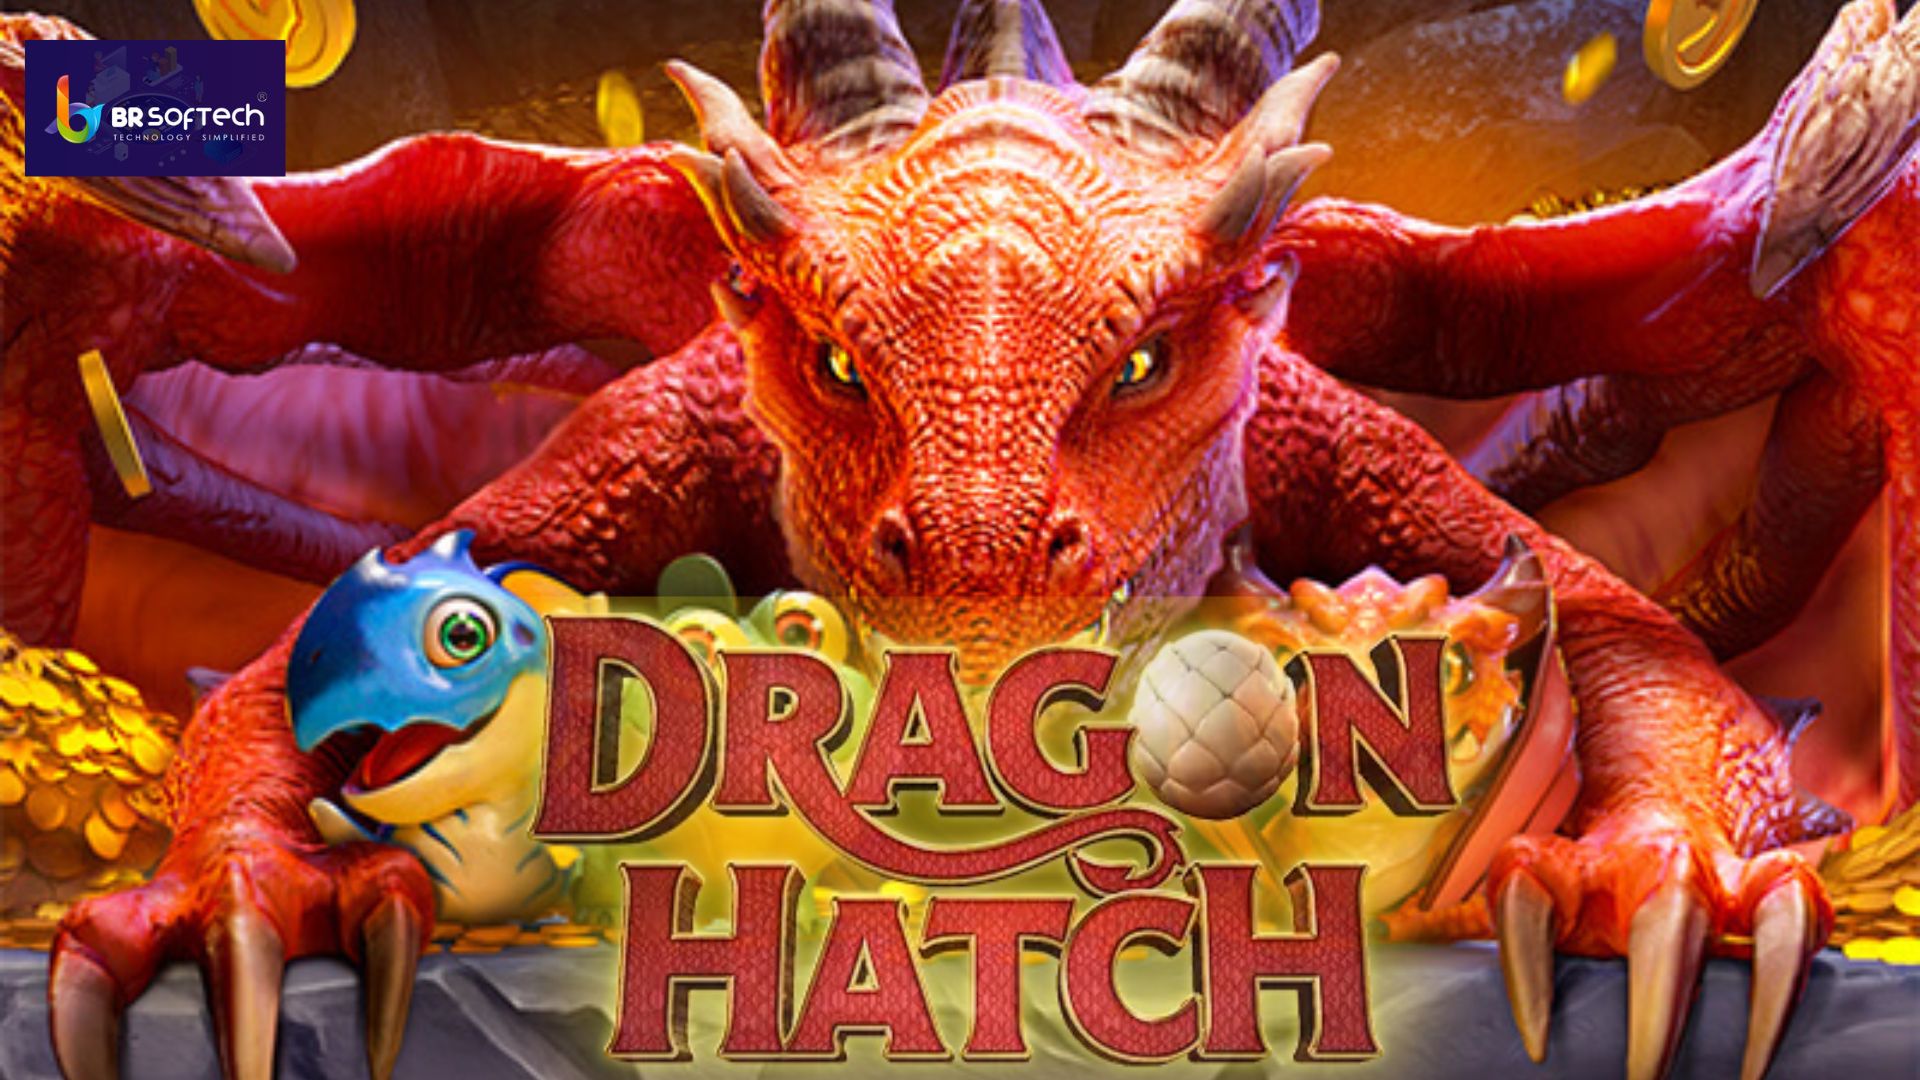 Dragon Hatch Game Review